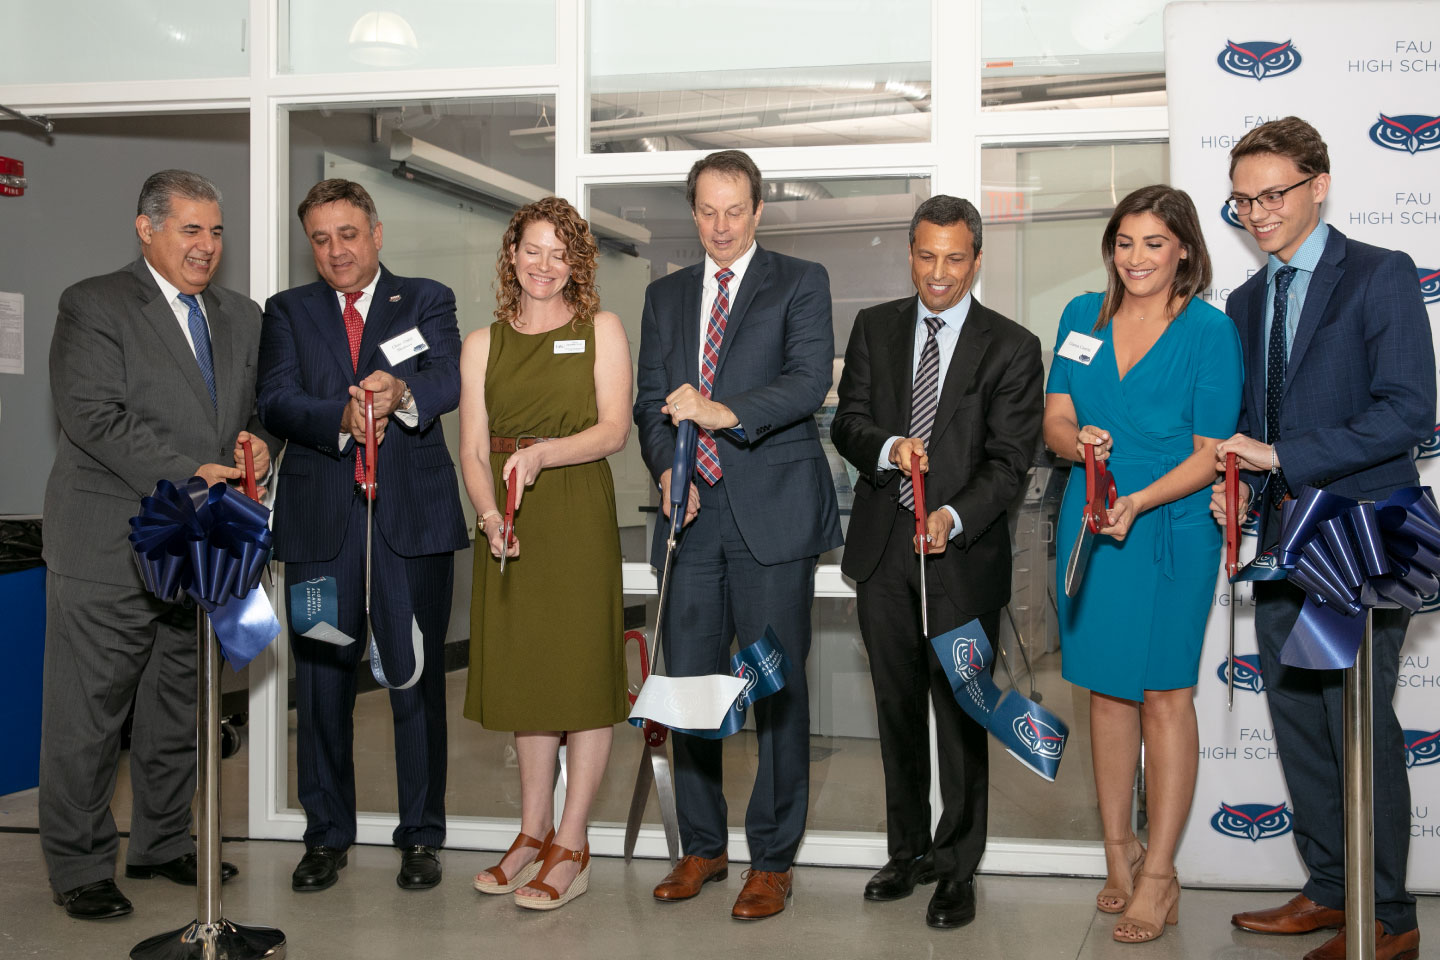 From left to right, Anthony Barbar, FAU Board of Trustees chair emeriti; FAU Board of Trustees Chair Abdol Moabery; Tricia Meredith, Ph.D.; FAU President John Kelly; Joel Herbst, Ed.D.; Gianna Caserta; Nick Pizzo. (Photo by Alex Dolce)